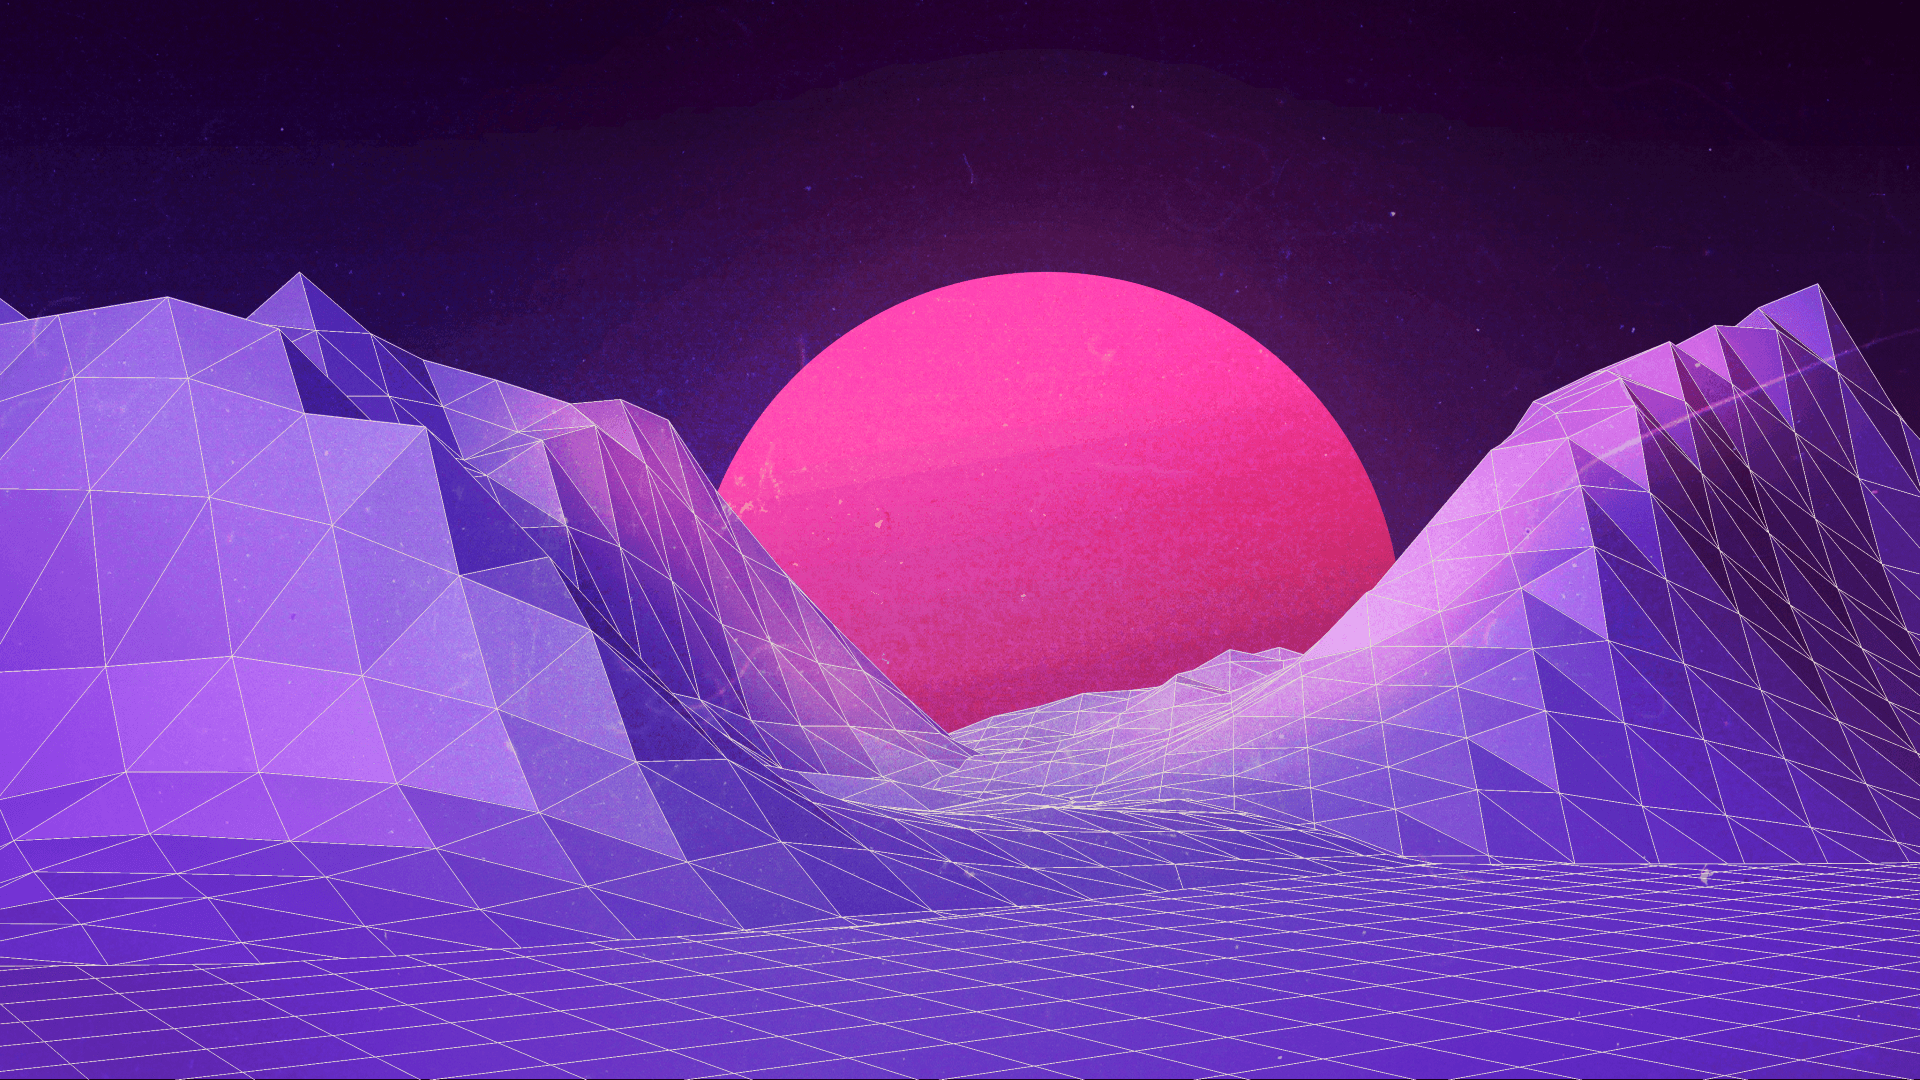 Free Aesthetic Vaporwave Wallpaper High Definition at Cool